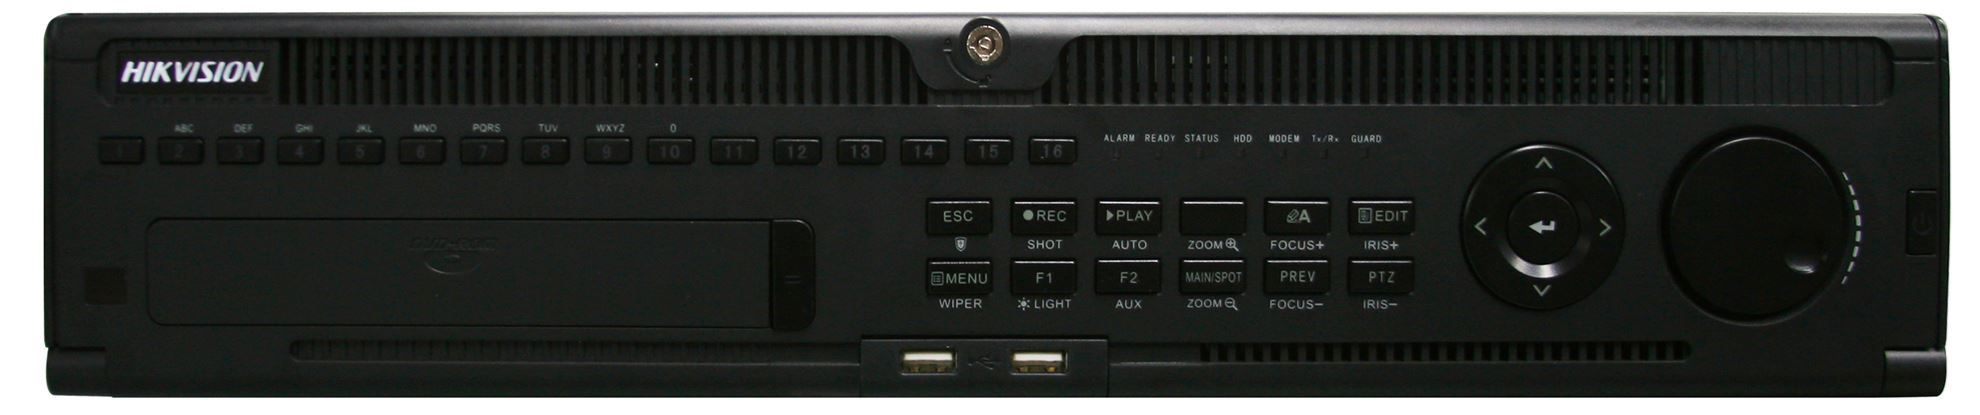 HIKVISION 32 Channel NVR with Dual LAN - NO HDD. 2-3 Working Days Lead Time.